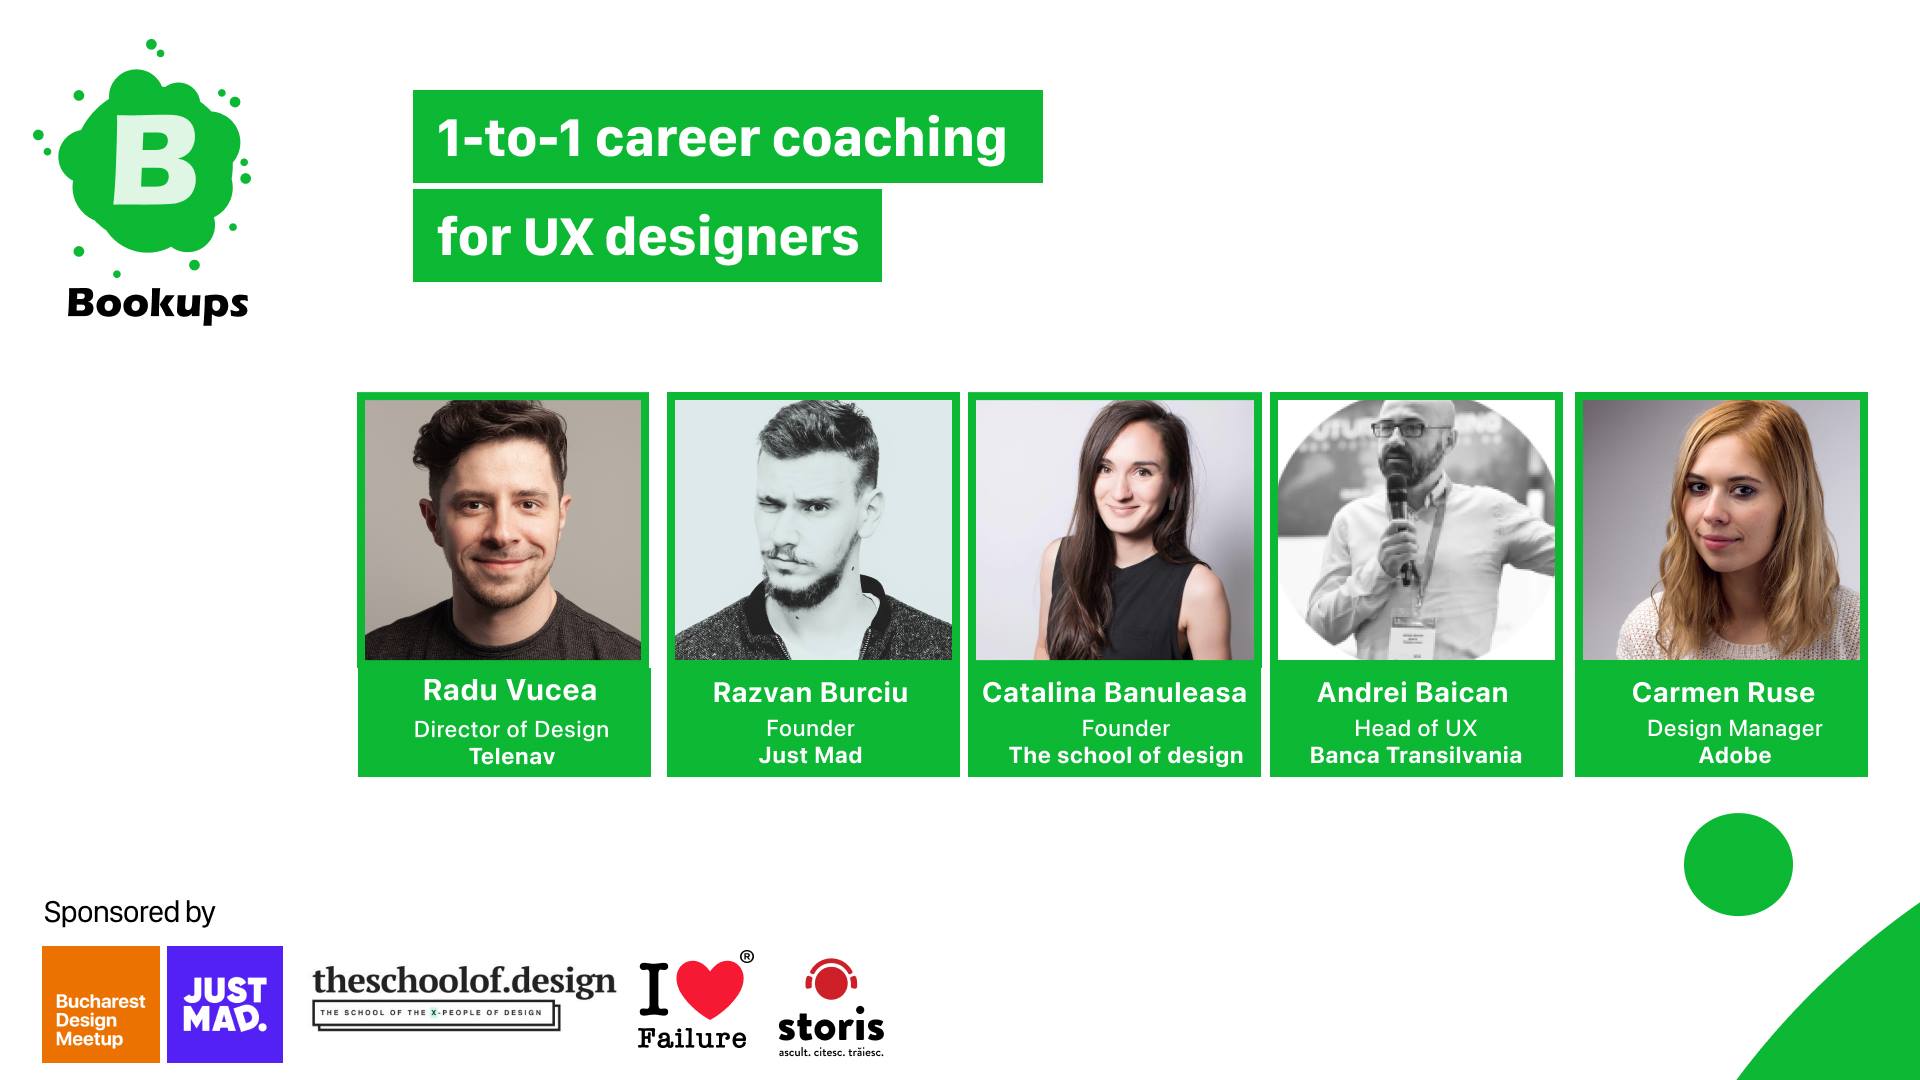 1-to-1 career coaching for UX designers